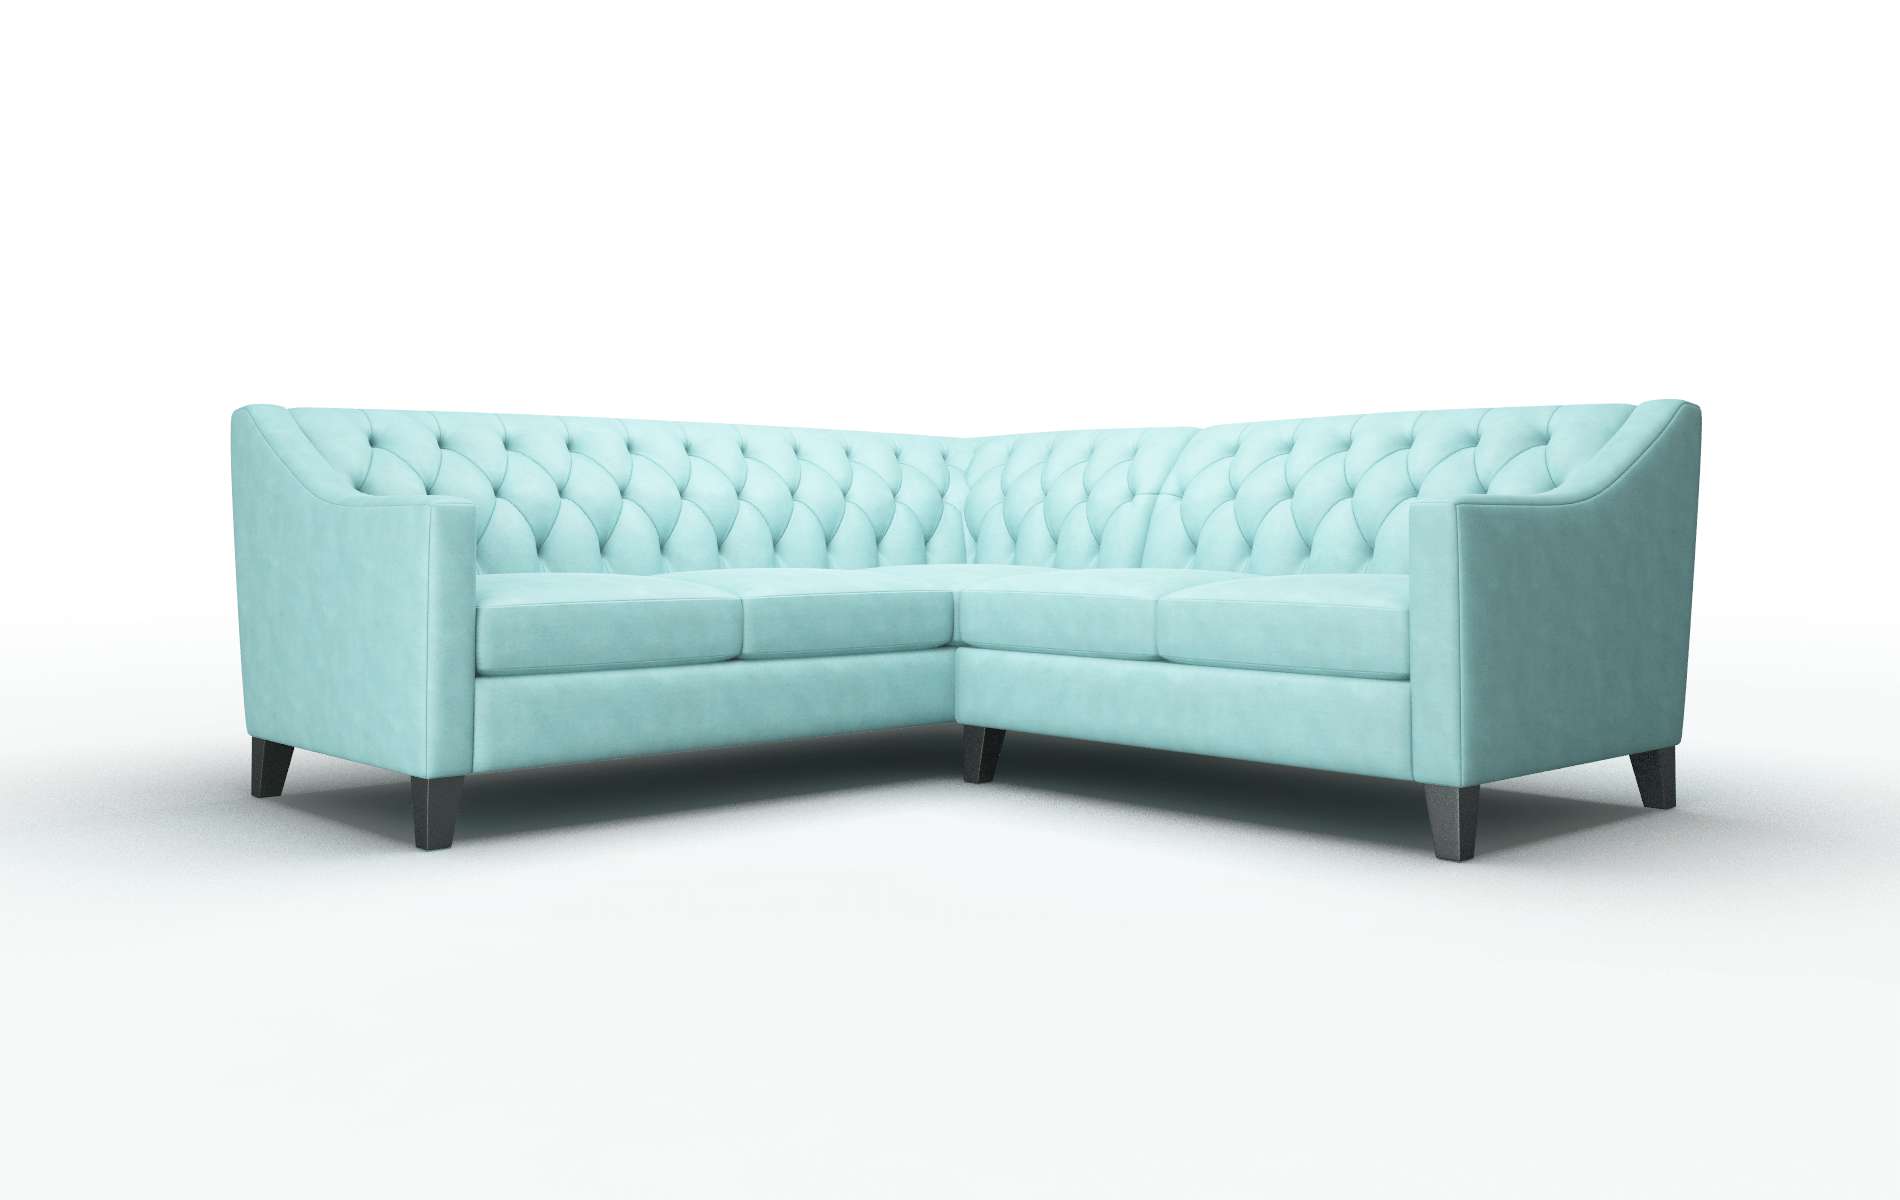 Seville Curious Turquoise Sectional espresso legs